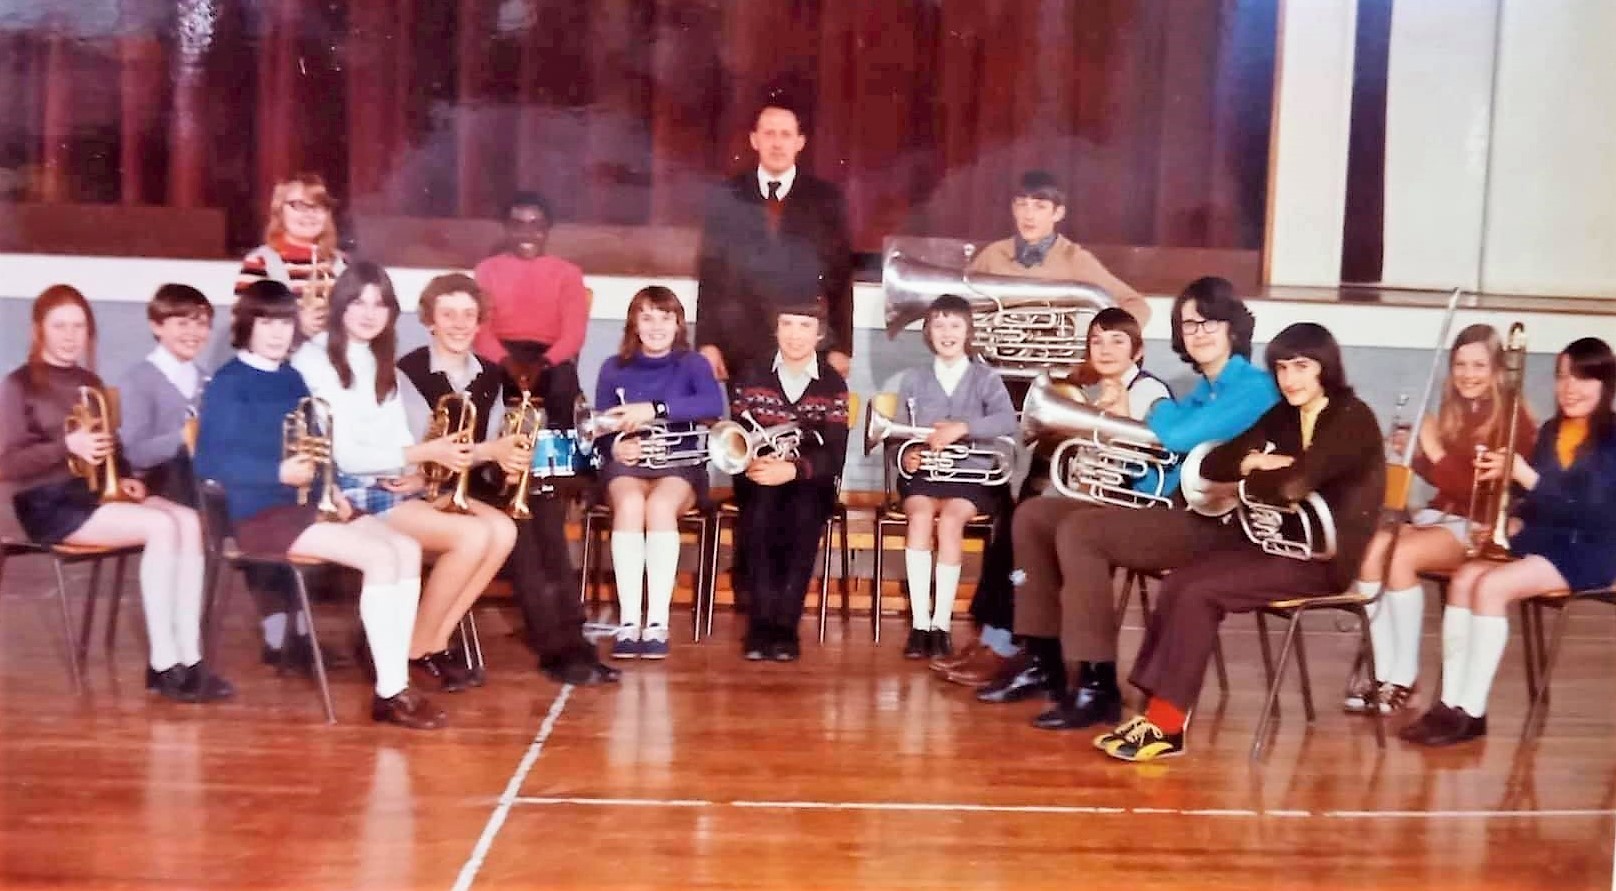 Janet (far right) in the school band with music teacher, Alf Liddle